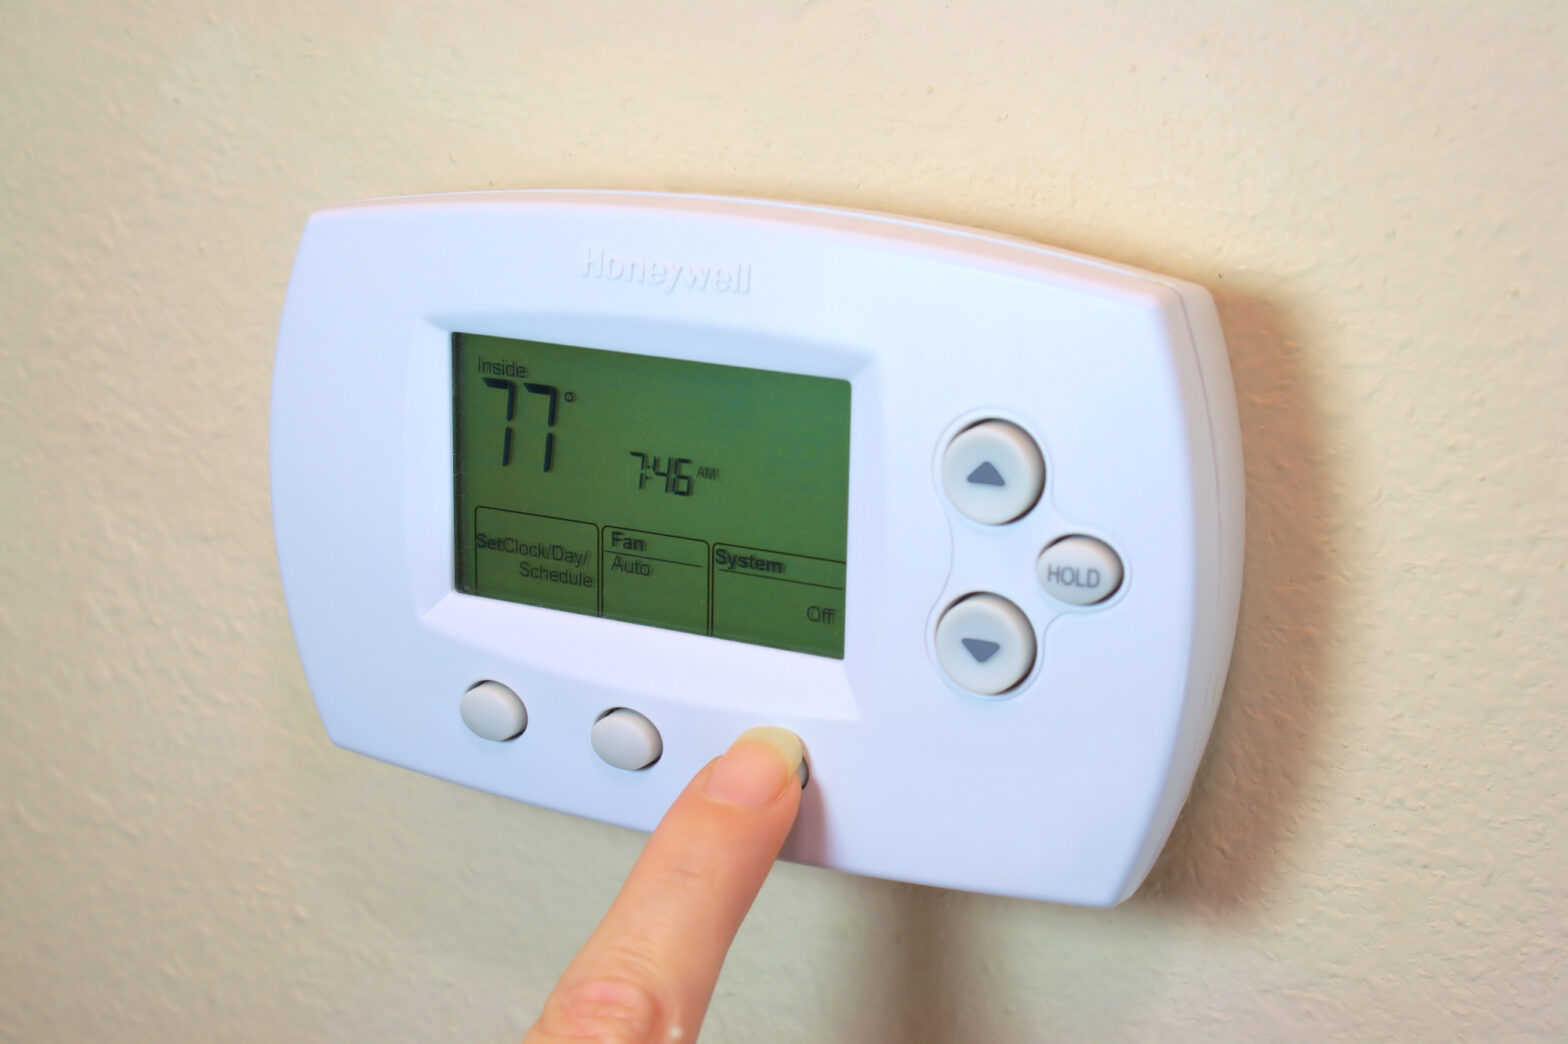 Should I set my thermostat to AUTO?